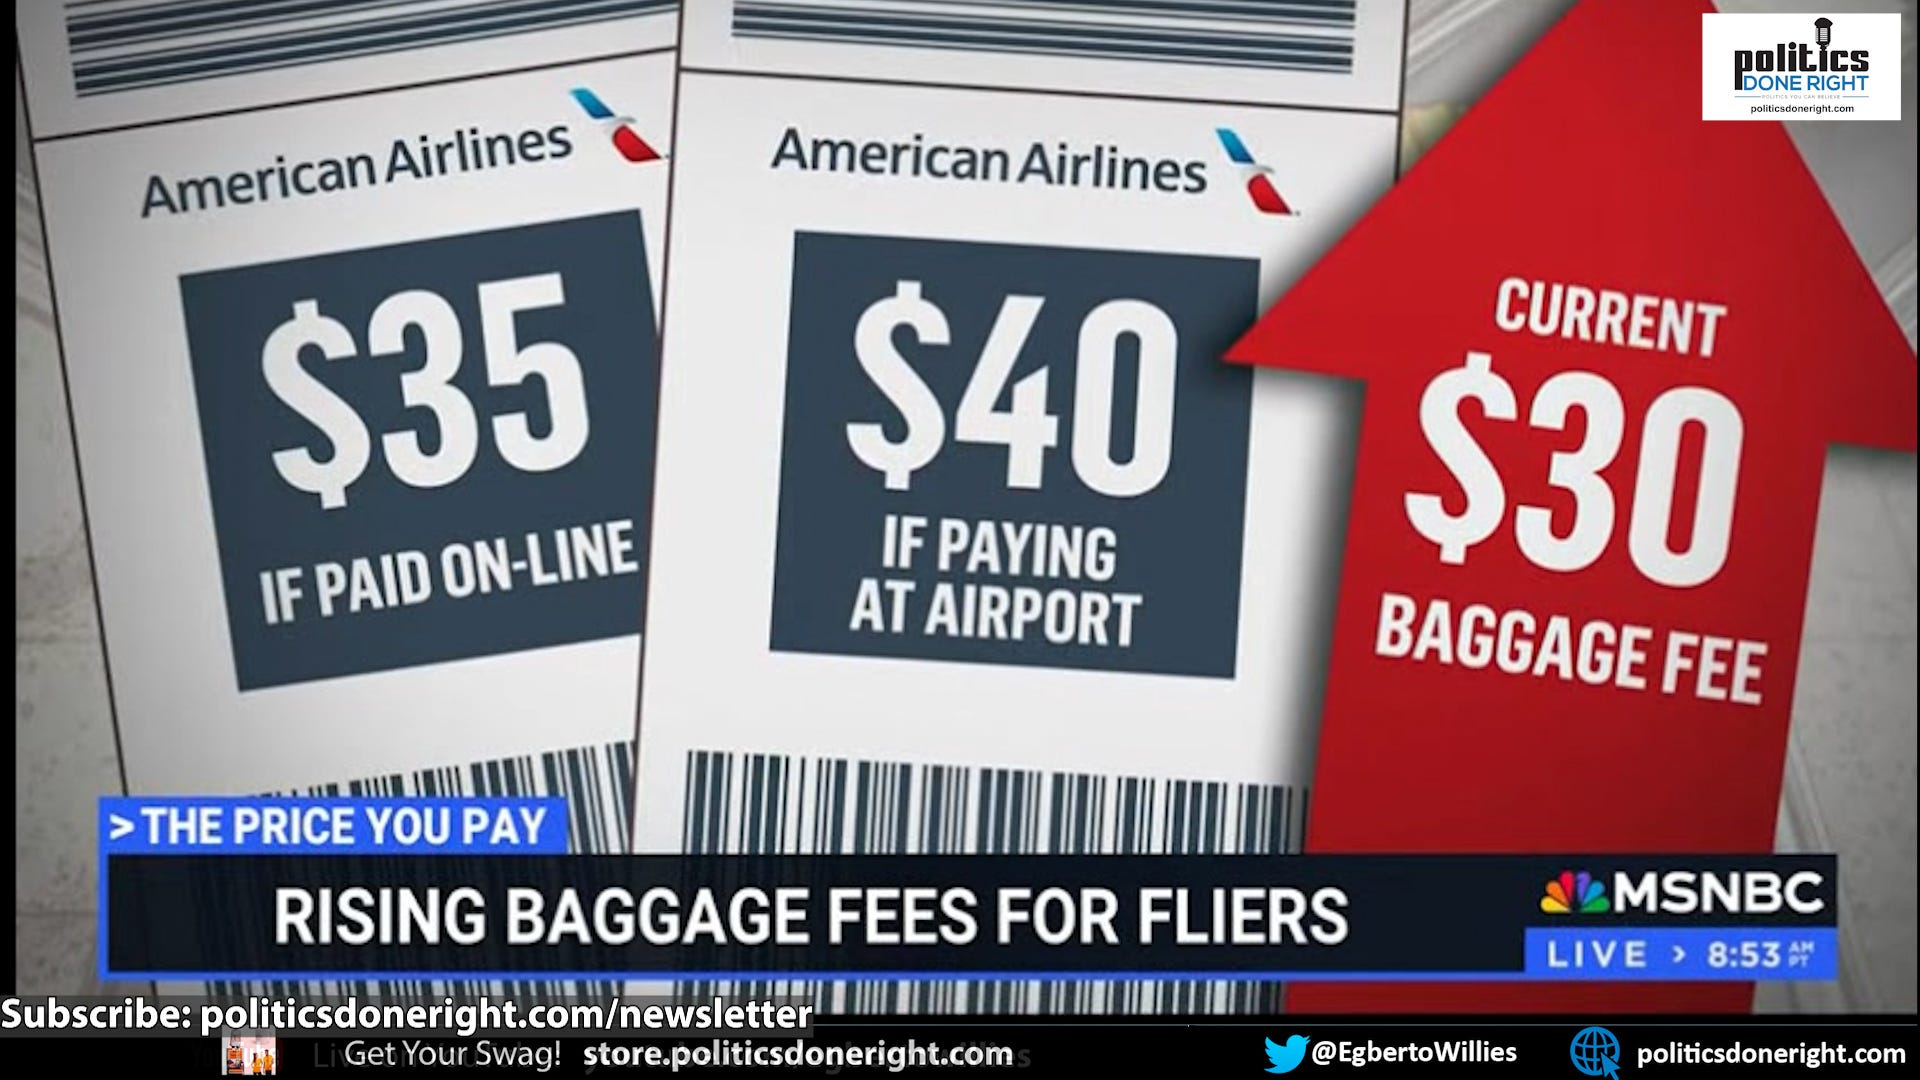 Airlines raise cost of checking luggage. That’s not inflation. It is t